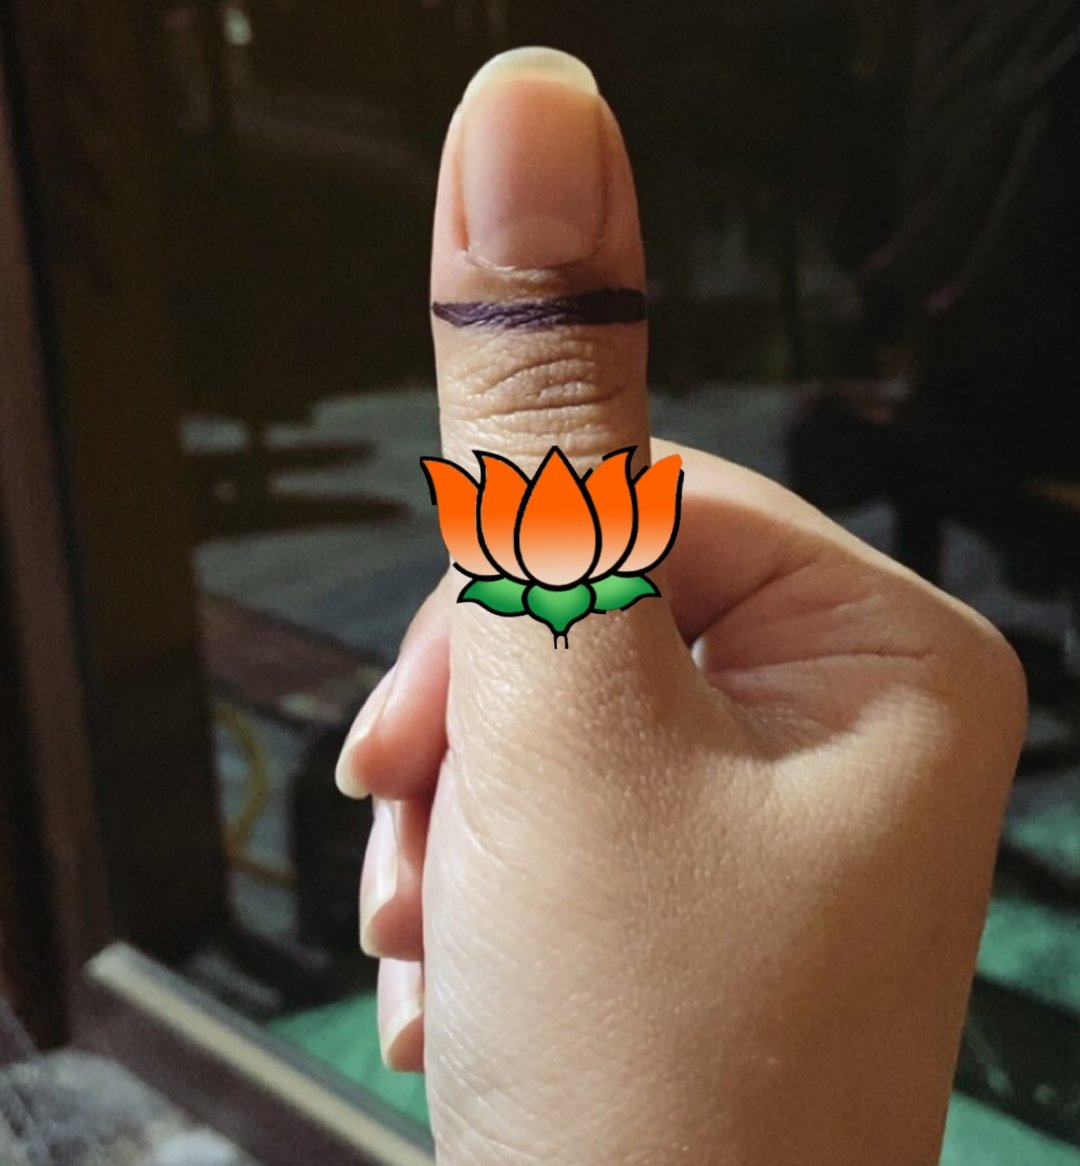 Voted against inheritance tax.

Voted for the Ram Mandir.

Voted for national security.

Voted for an inclusive India.

Voted against 'Pappu.'

Voted for myself.

Voted for Modi.

Voted for the BJP.

#Election2024